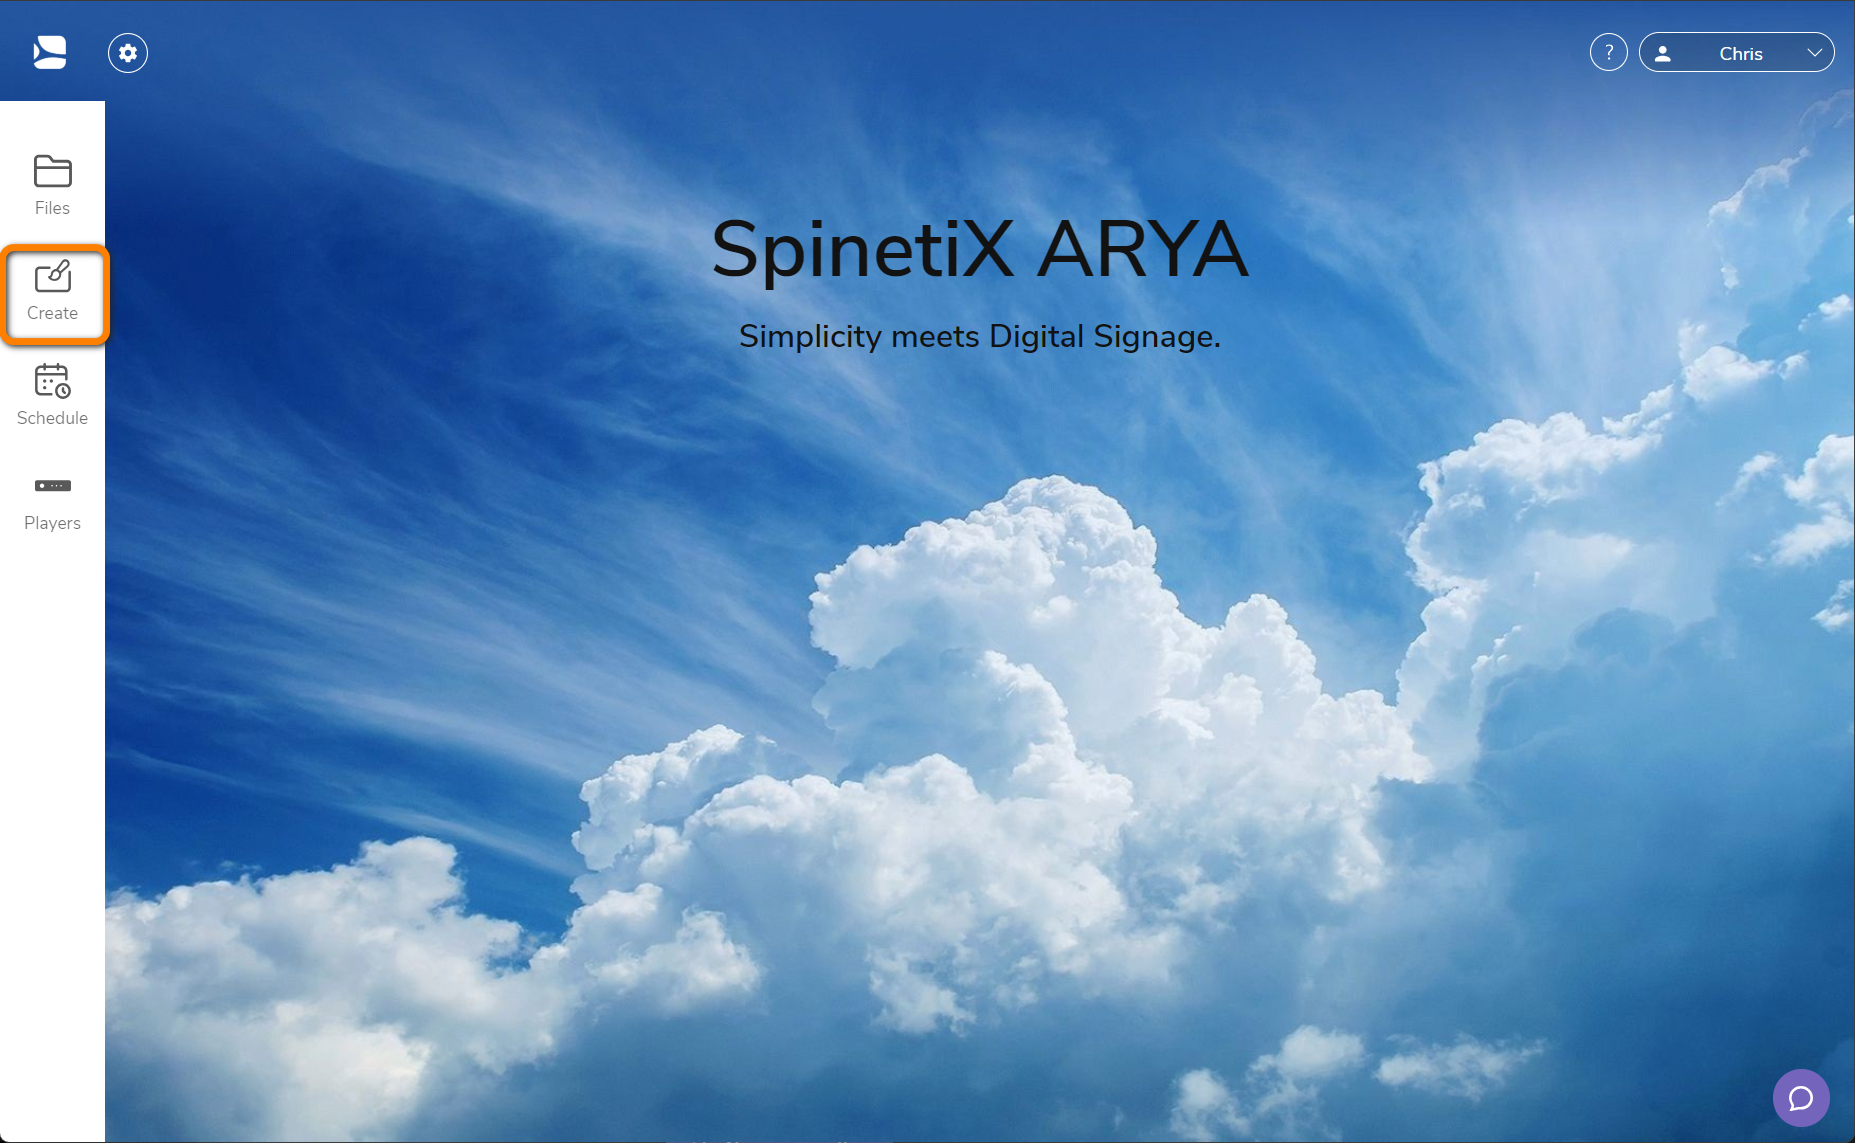 spinetix-arya-main-screen-with-accounts-button-create-marked.png